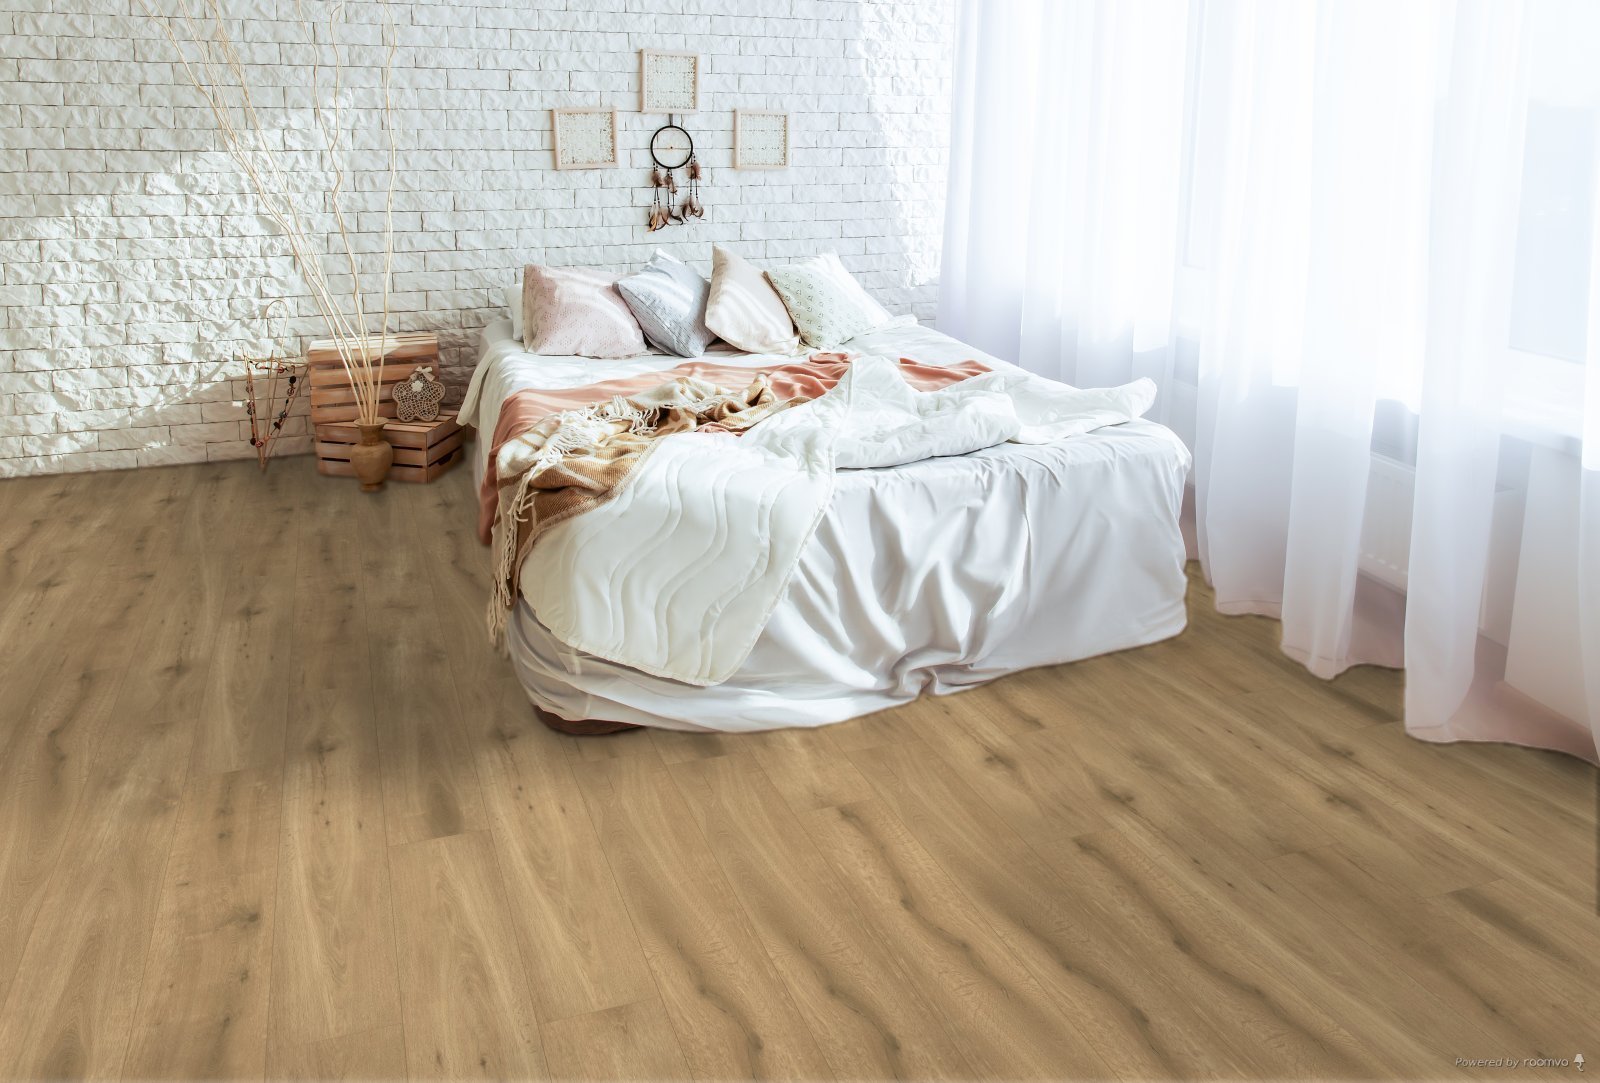 Horizen Flooring presents to you a picture of a quality wide plank Vivaldi luxury vinyl plank. NovoCore Q XXL Tango collection features a wide range of colors & designs that will compliment any interior. Natural wood grain synchronized surface allow for an authentic hardwood look & feel. This collection features a 0.3″ / 7.5 mm overall thickness and a durable 22 mil / 0.55 mm wear layer for residential and commercial applications.